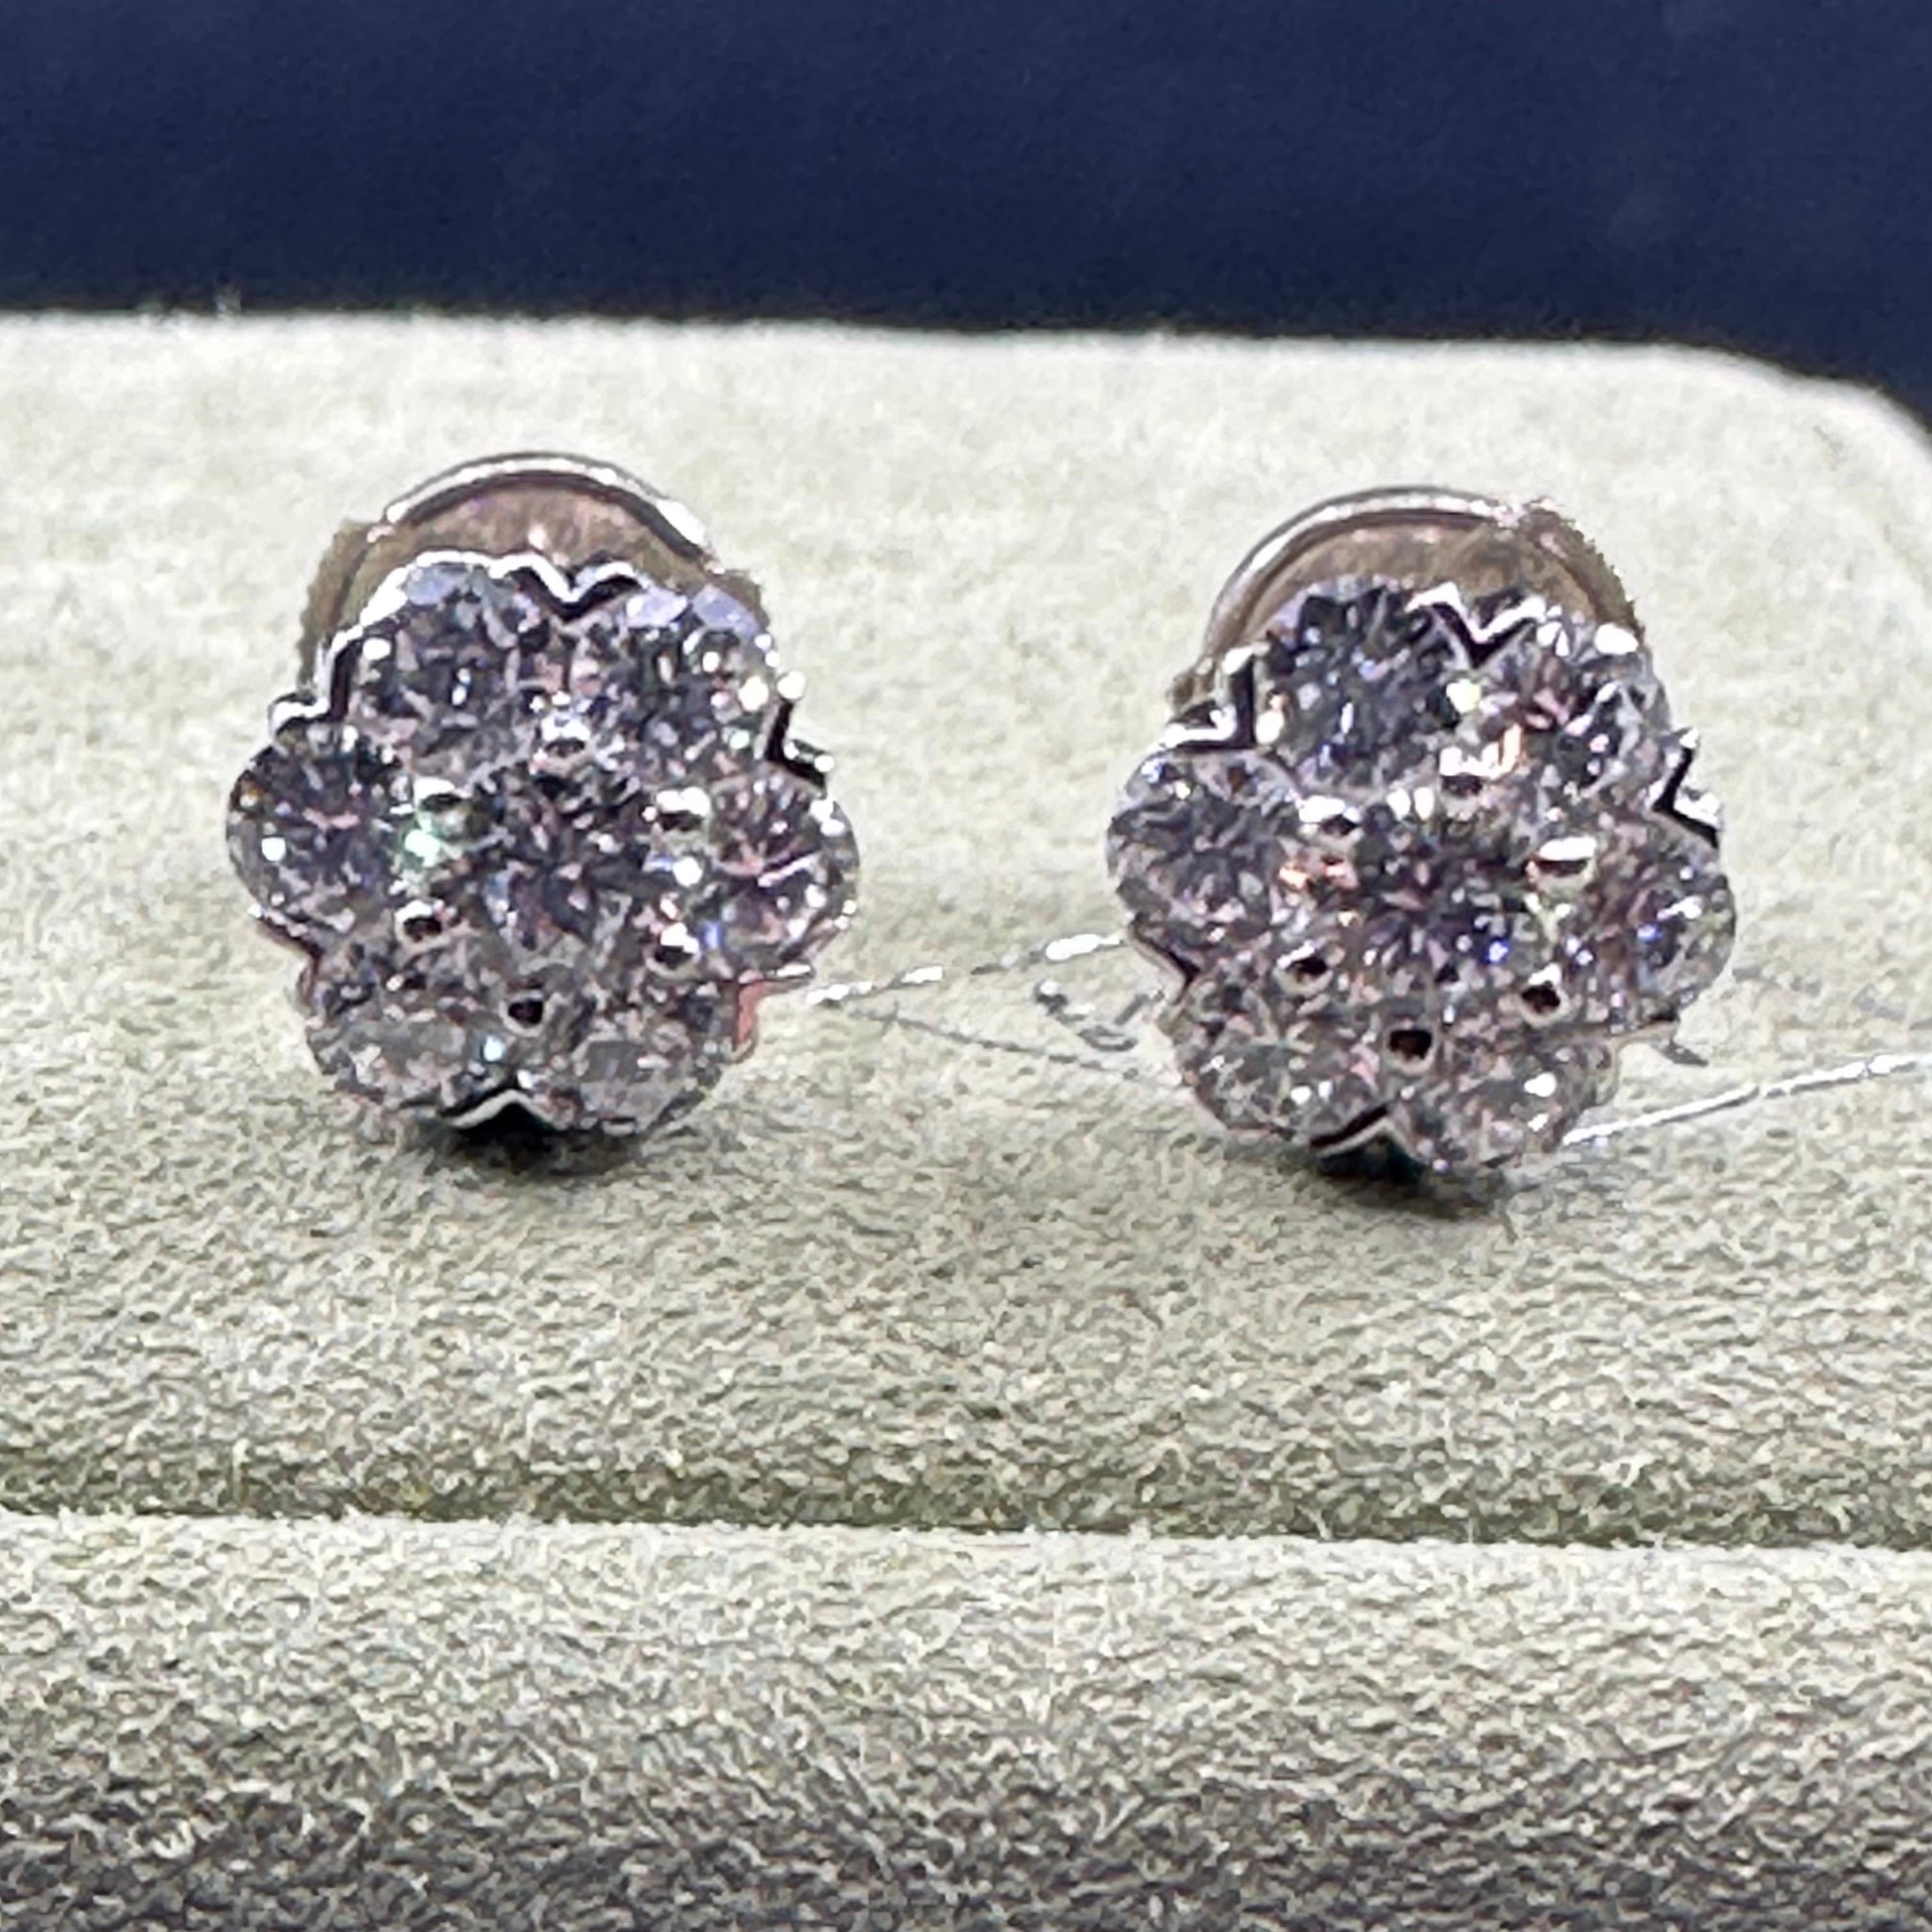 VCA FIEURETTE Large Diamond Studs 1.94 cts tw set in 18k White Gold . 14 round brilliant cut diamonds color grade D and clarity Vvs ref:VCARA48300 Serial BLXXXXX
PURCHASED 2006 .
From the VCA website : Fleurette earrings, rhodium plated 18K white